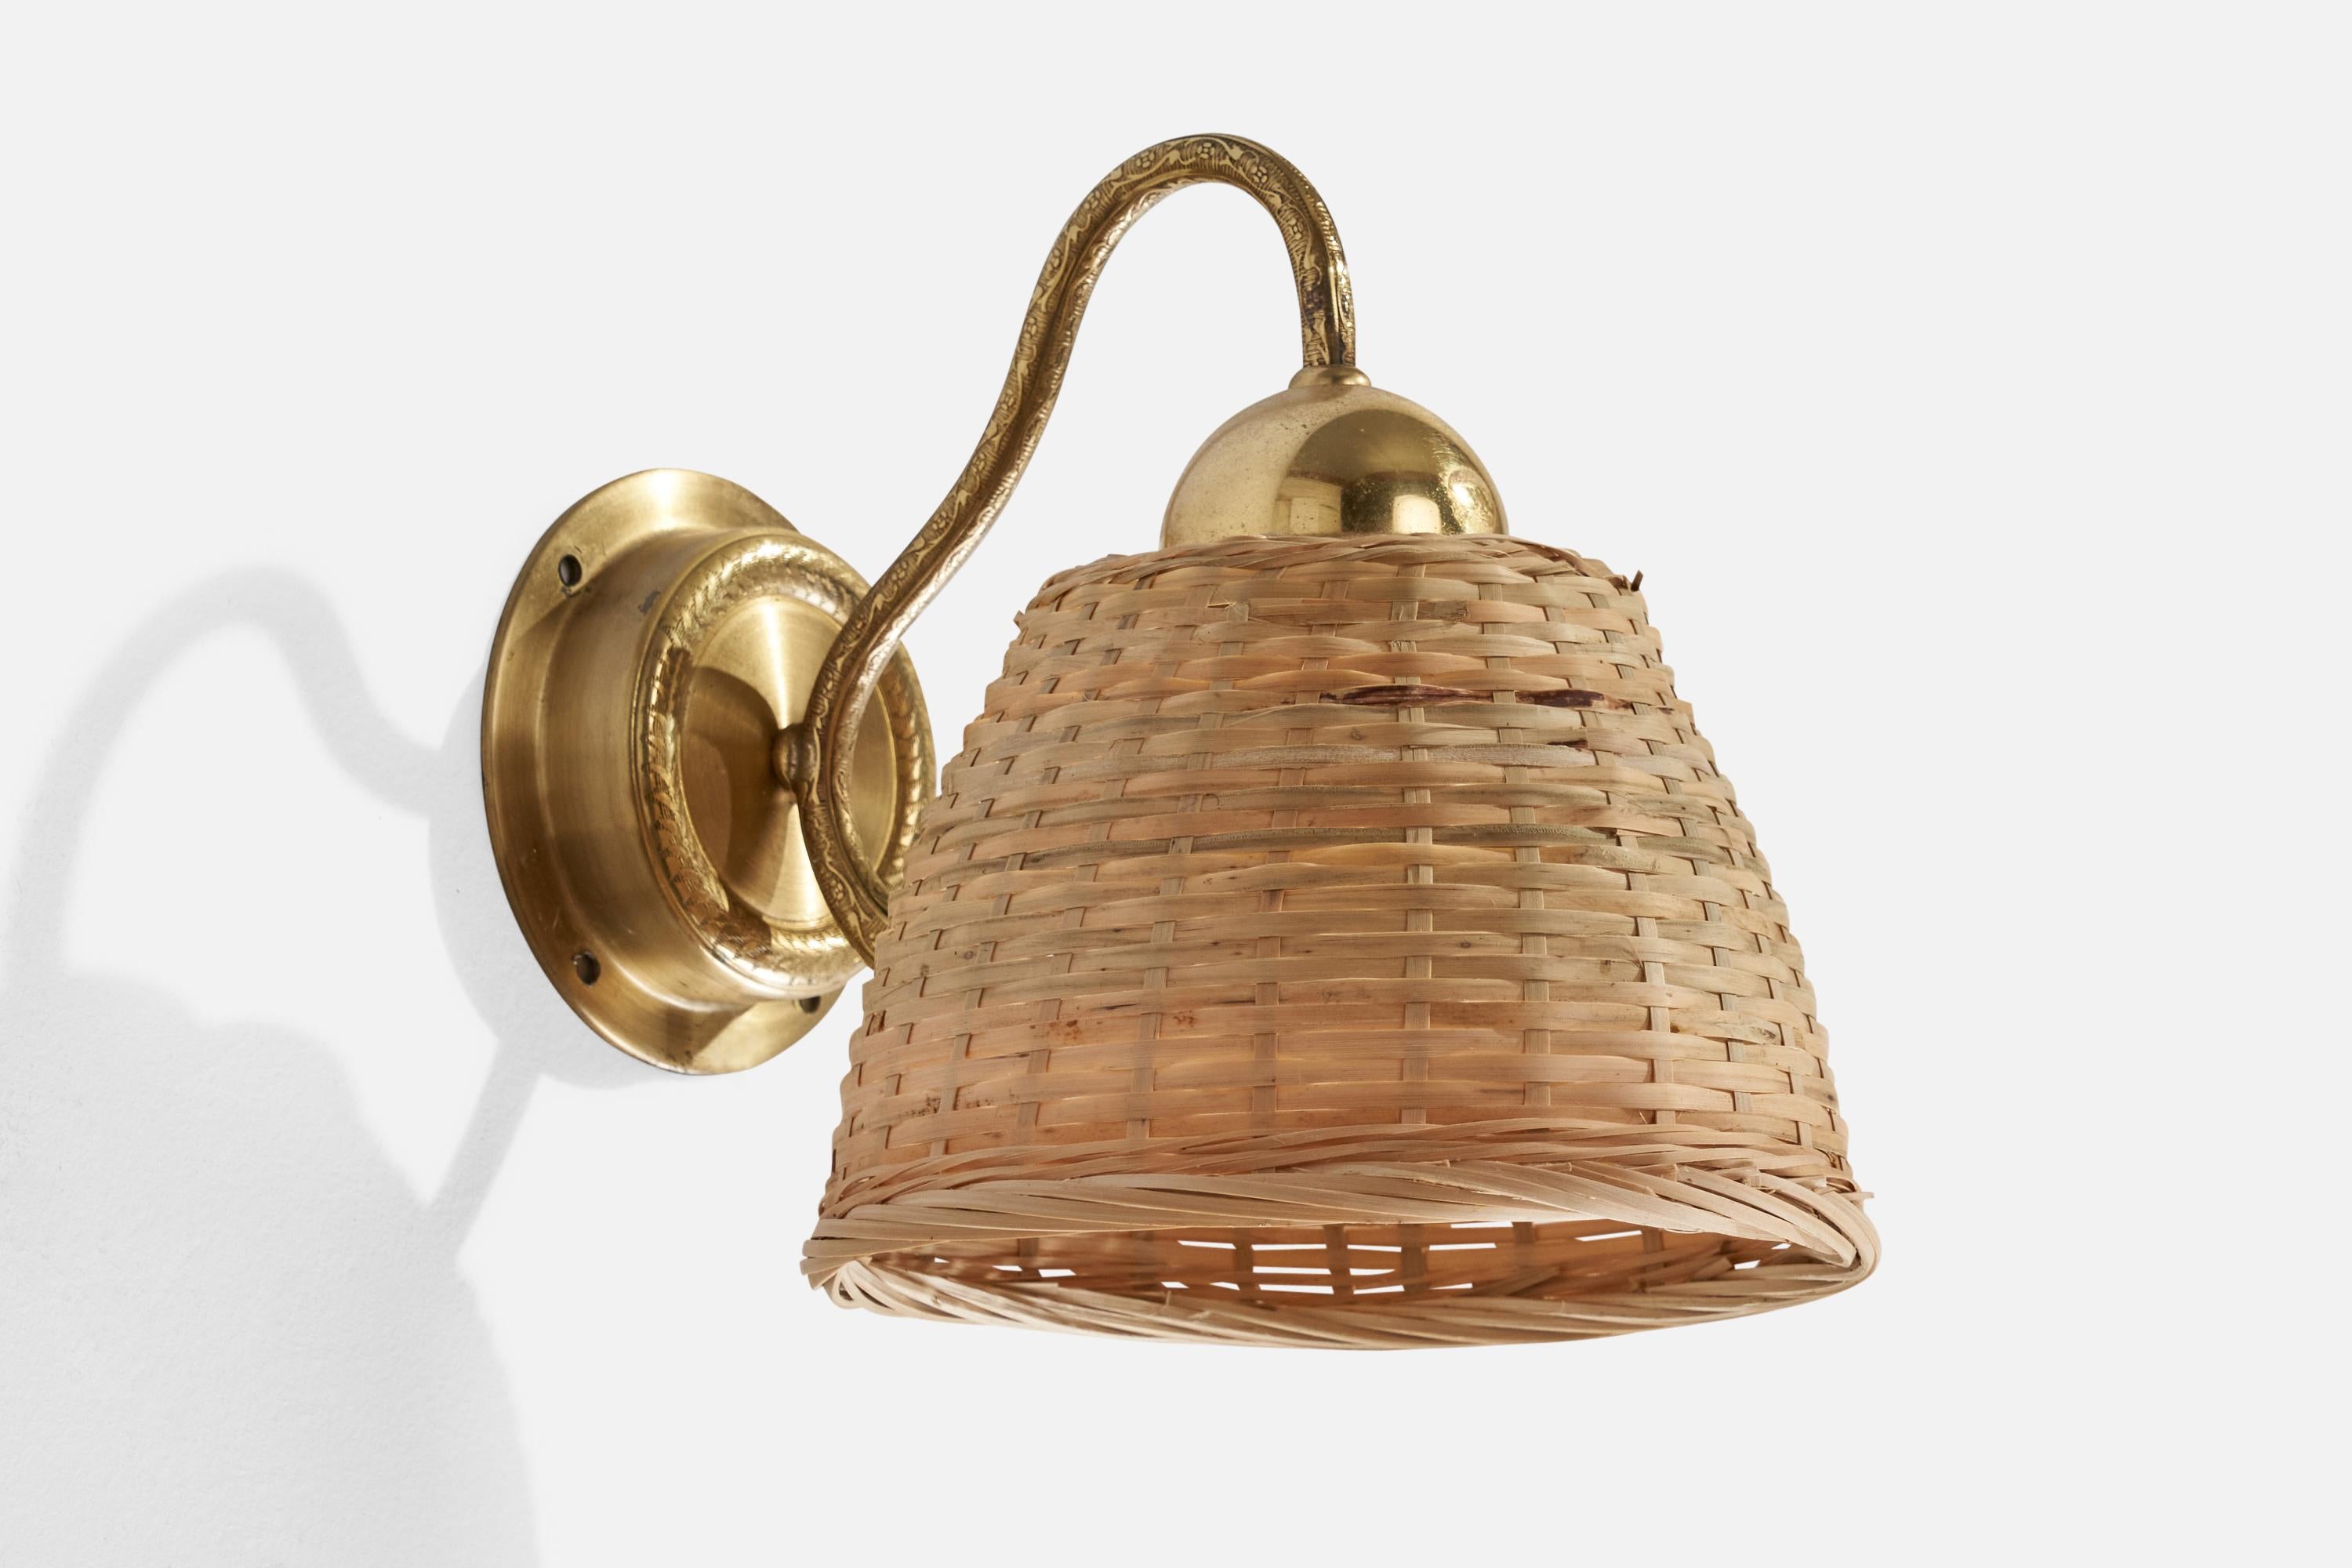 A brass and rattan wall light produced by EWÅ Värnamo, Sweden, 1970s.

Assorted rattan lampshade.
Overall Dimensions (inches): 8.25” H x 8.25” W x 7.25” D
Back Plate Dimensions (inches): 4.19” H x 1.1” D
Bulb Specifications: E-26 Bulb
Number of